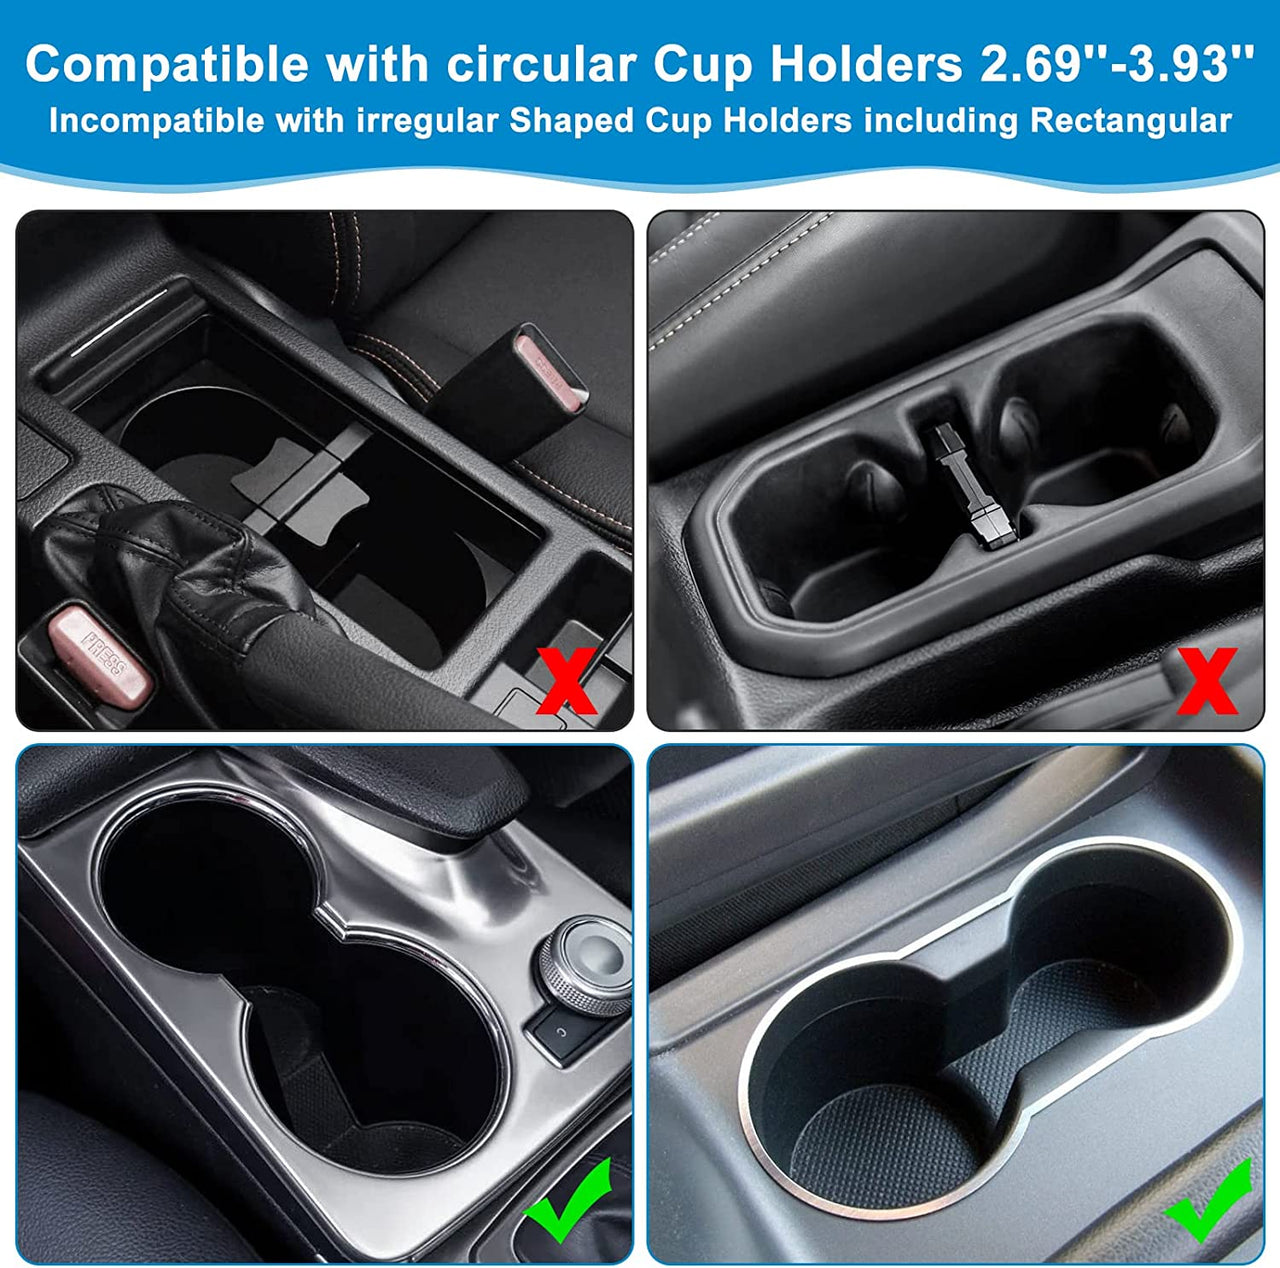 2-in-1 Car Cup Holder Expander Adapter with Adjustable Base, Custom Fit For Your Cars, Car Cup Holder Expander Organizer with Phone Holder, Fits 32/40 oz Drinks Bottles, Car Accessories CC15988